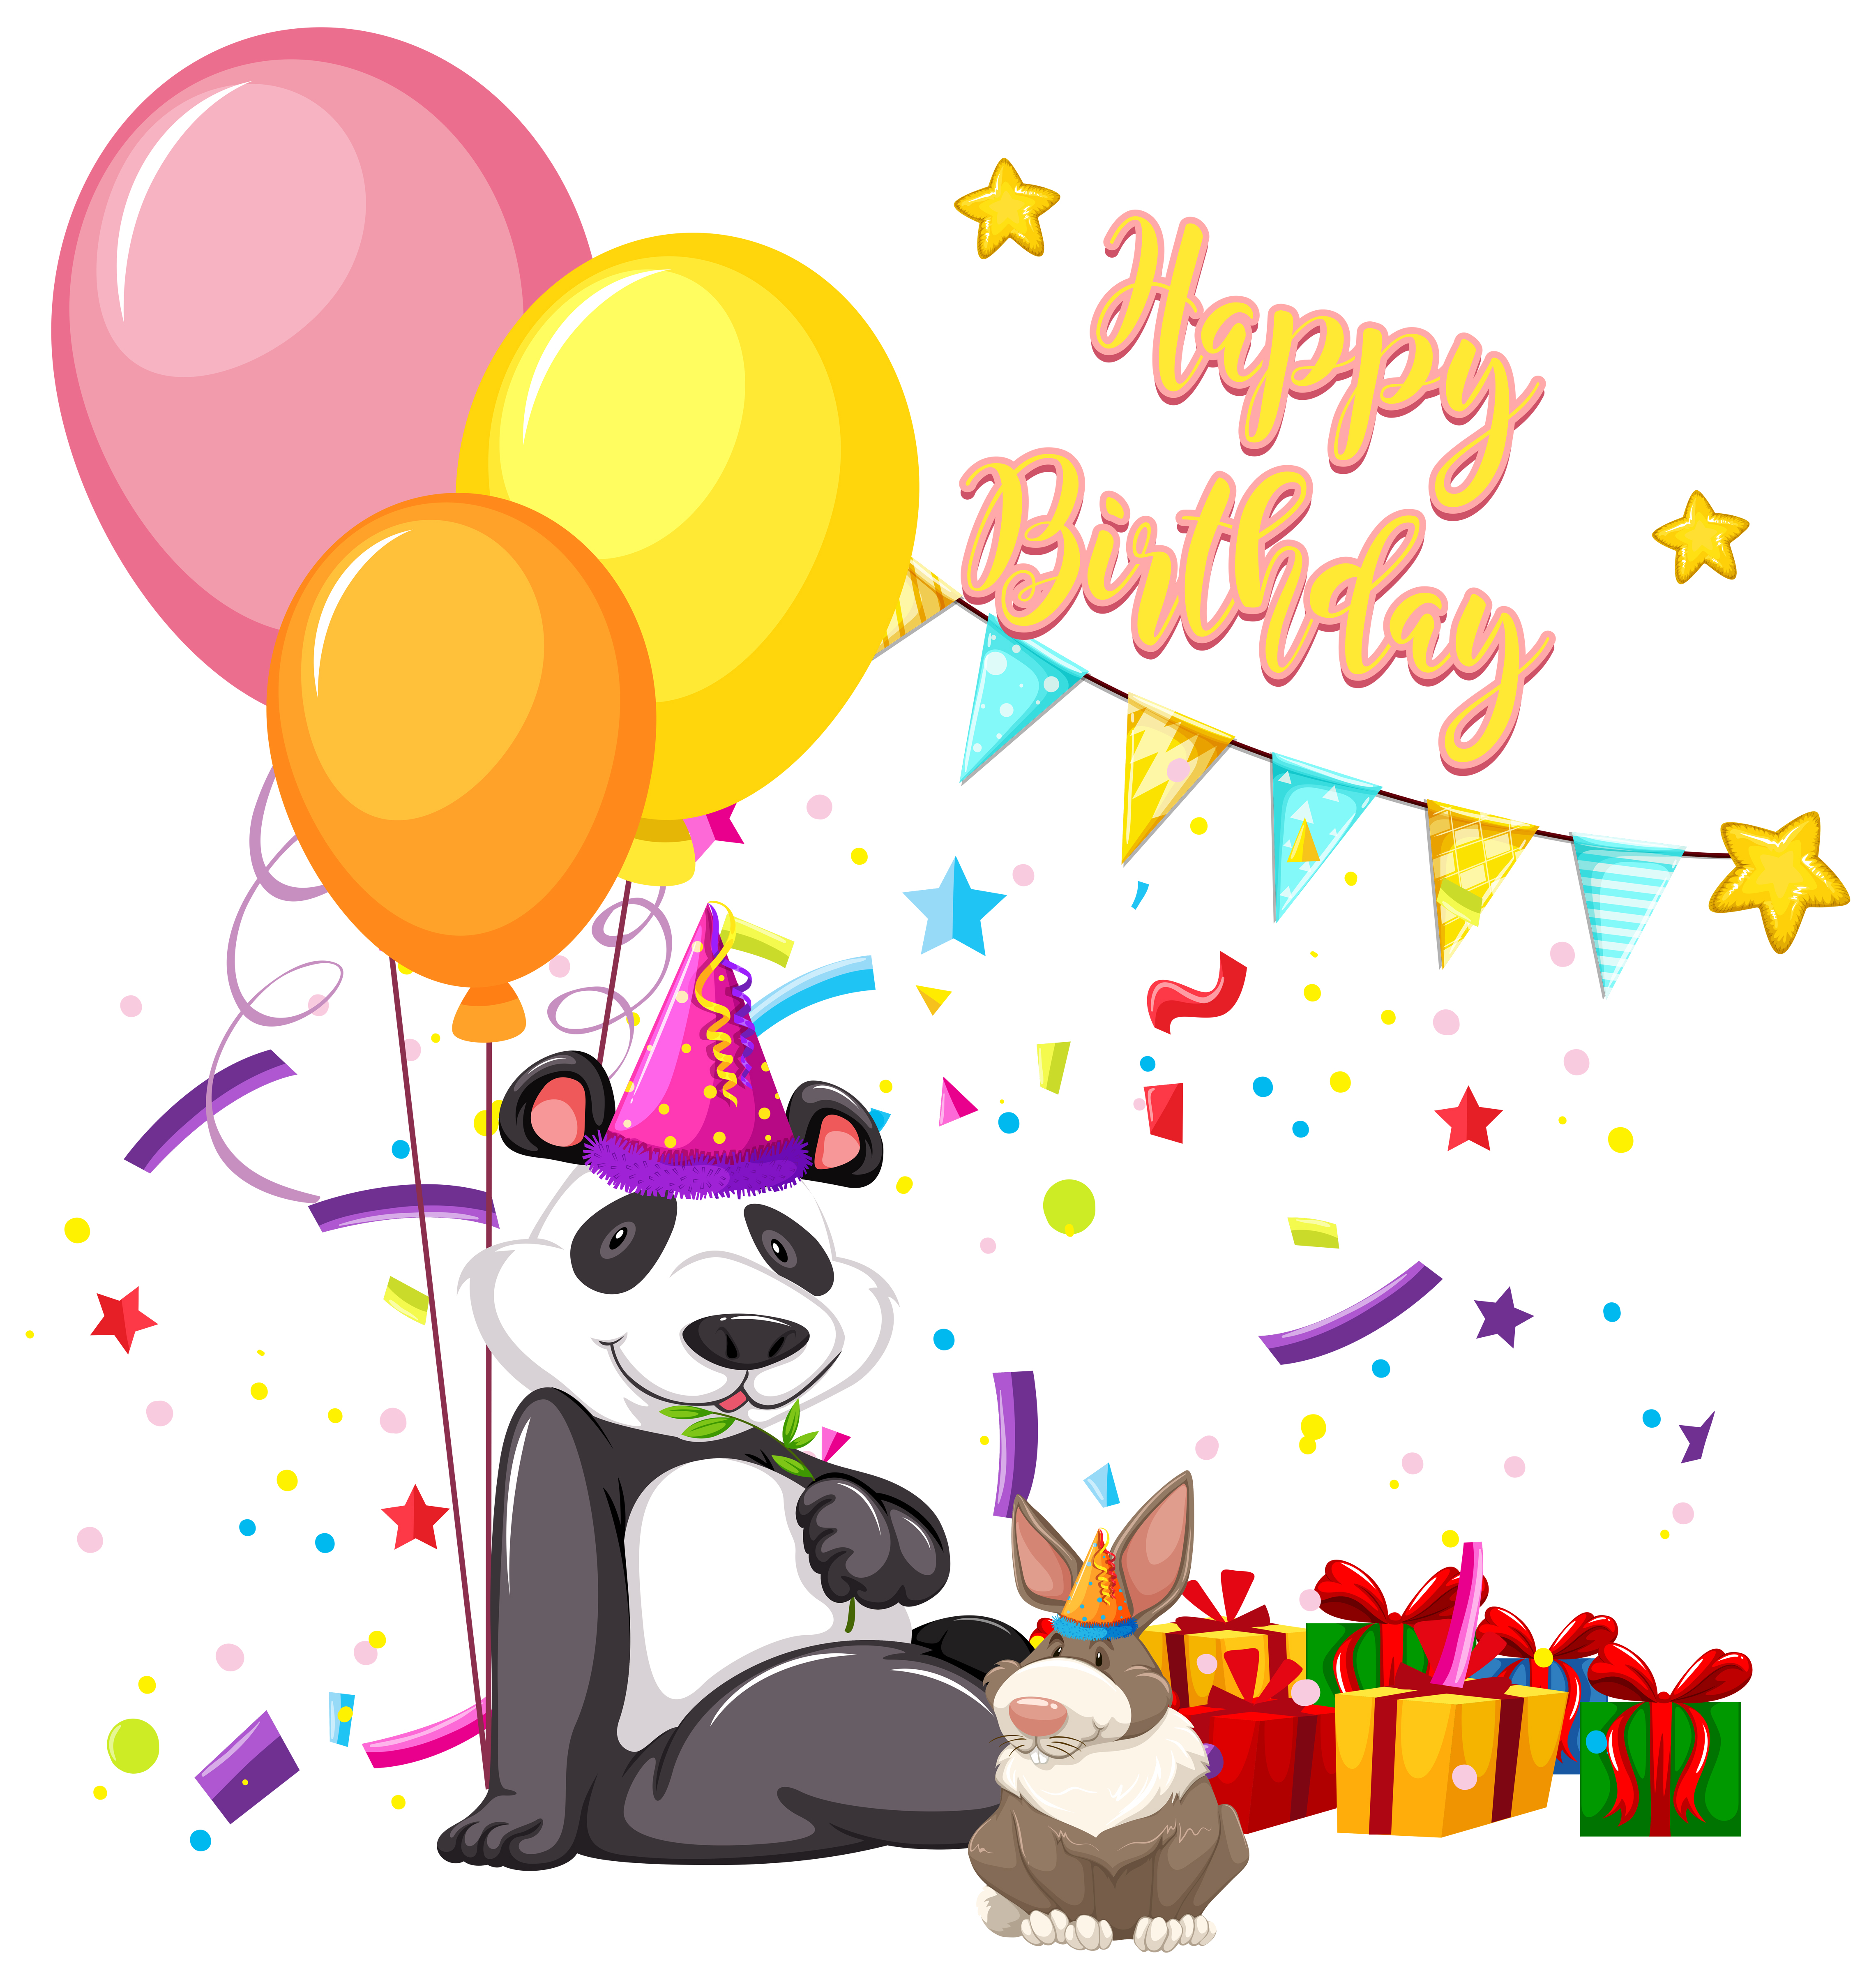 Download happy birthday panda card for free.